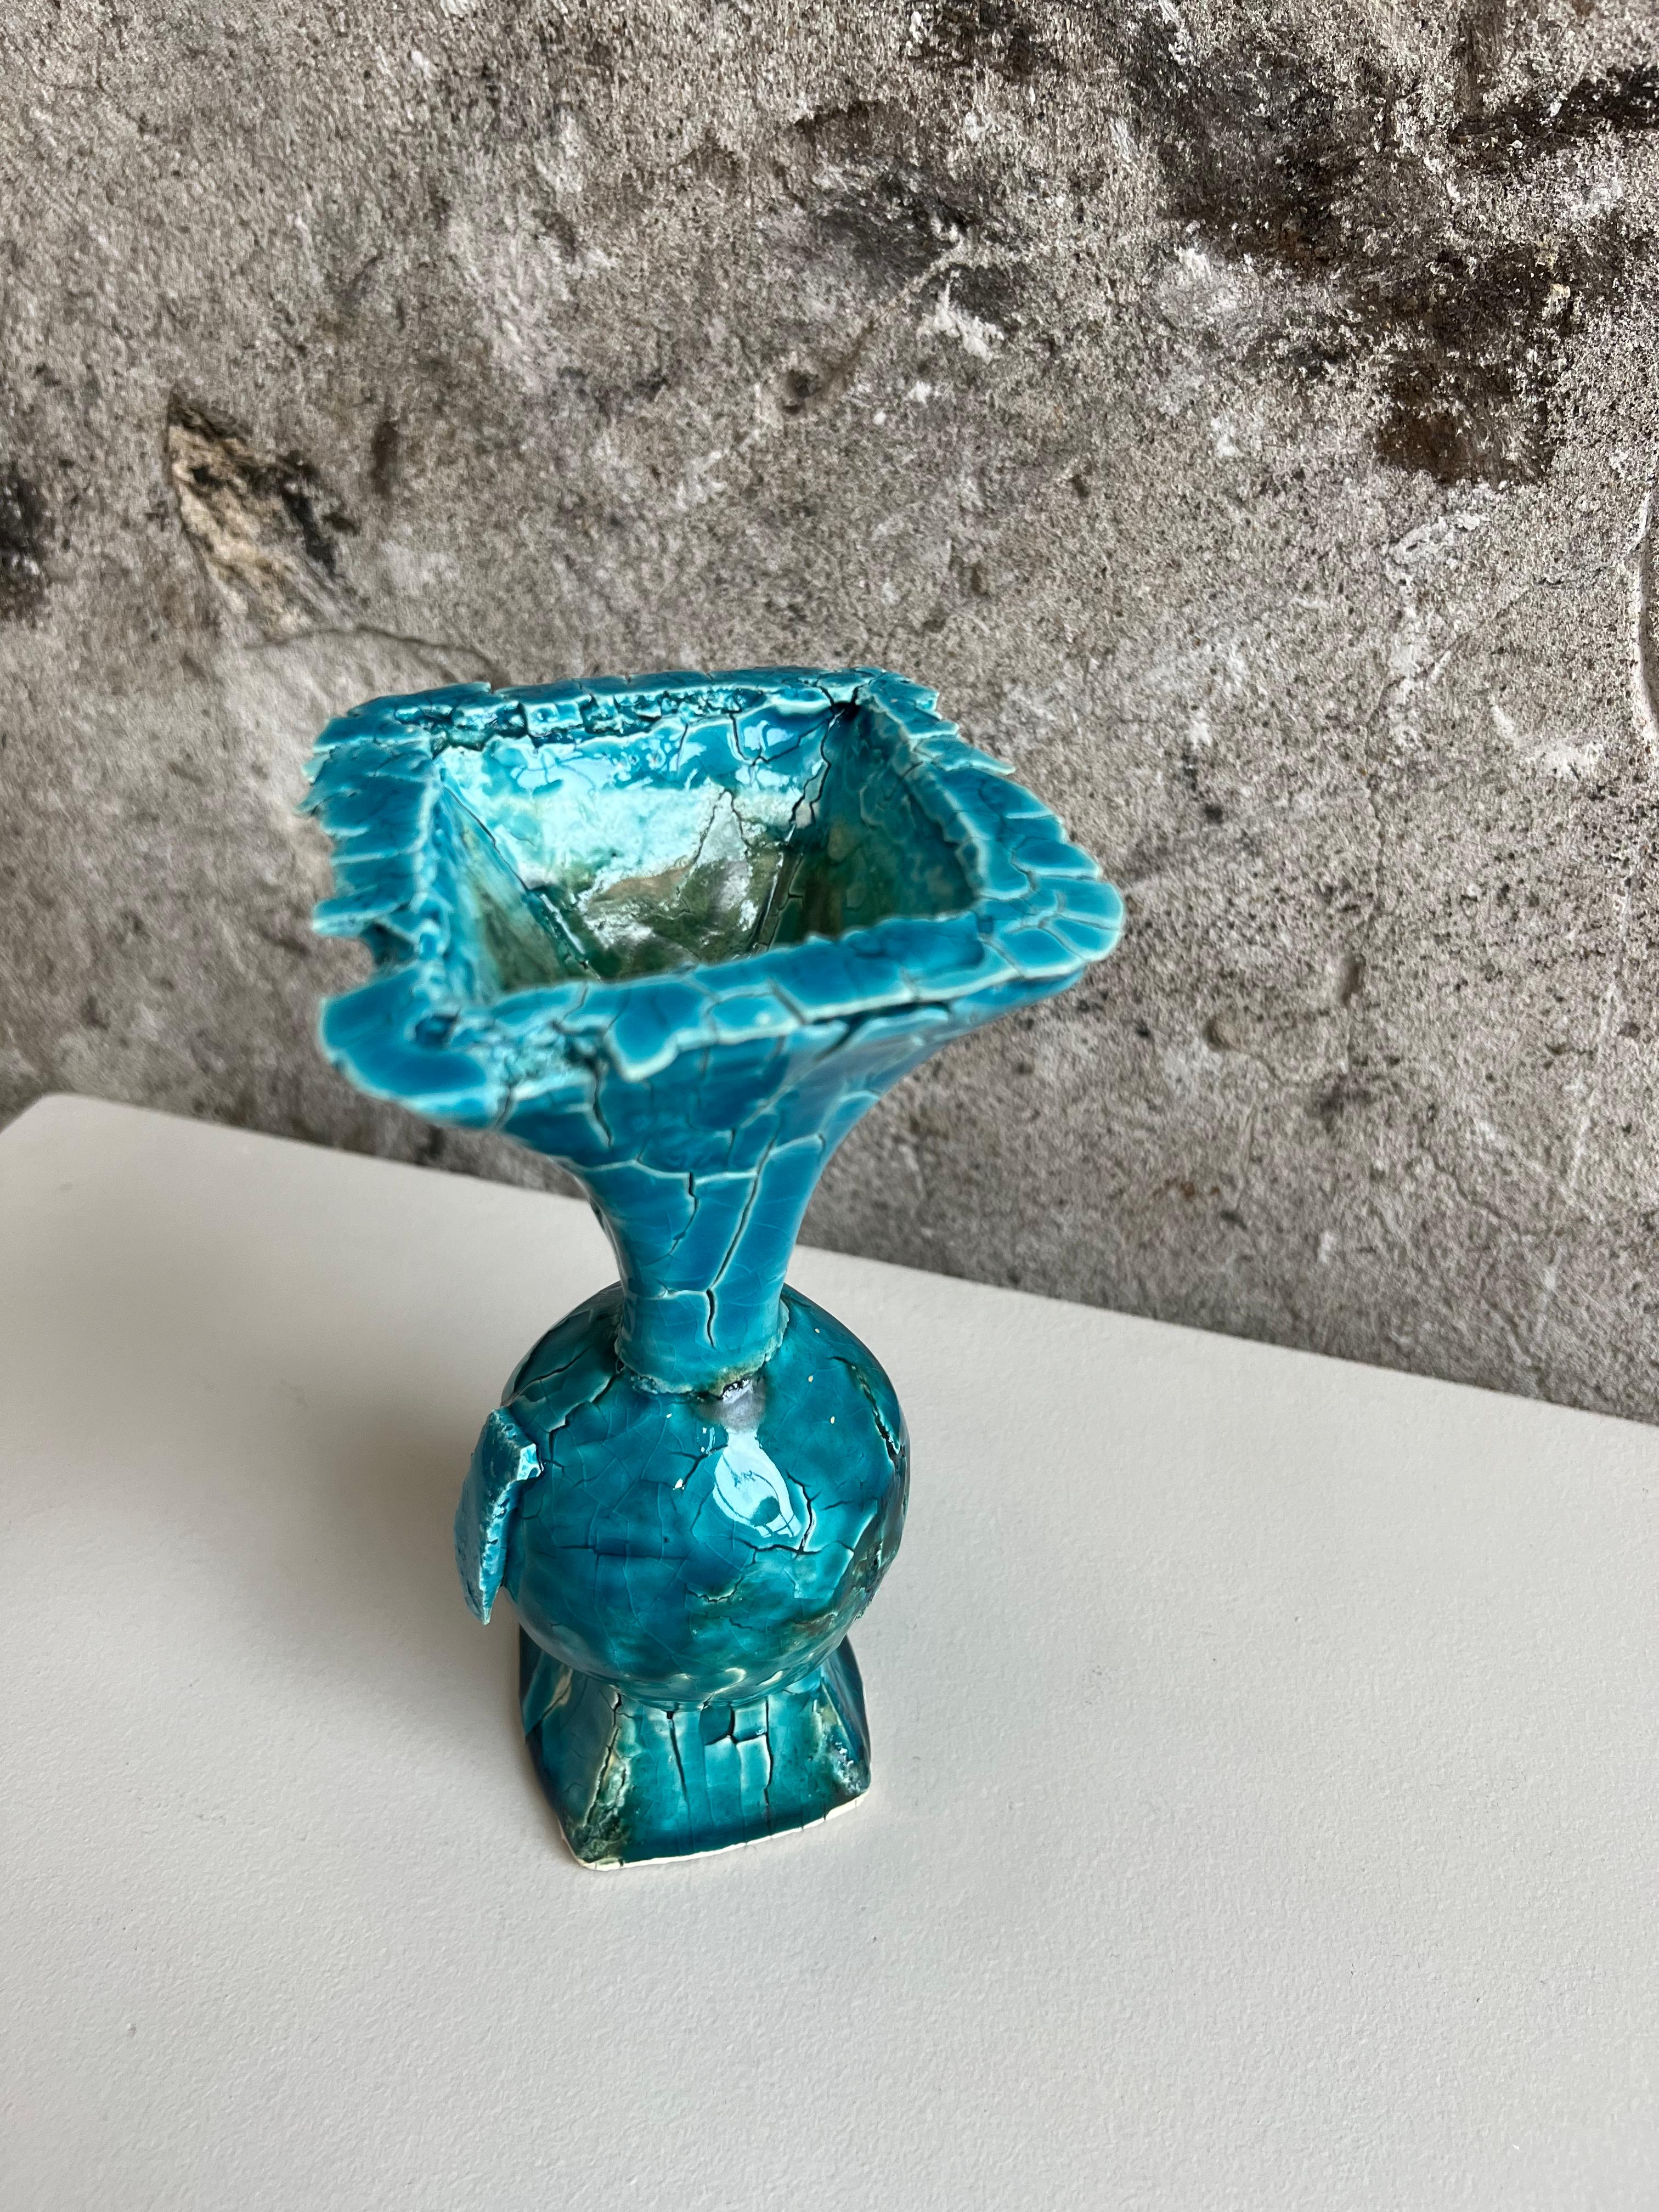 Uniquely textured crackle vase in a tapered urn style.  Colors of blue and teal are prominent throughout the vase with a green accent on the inside.  This piece was carefully handcrafted to achieve the interesting texture and composition of the